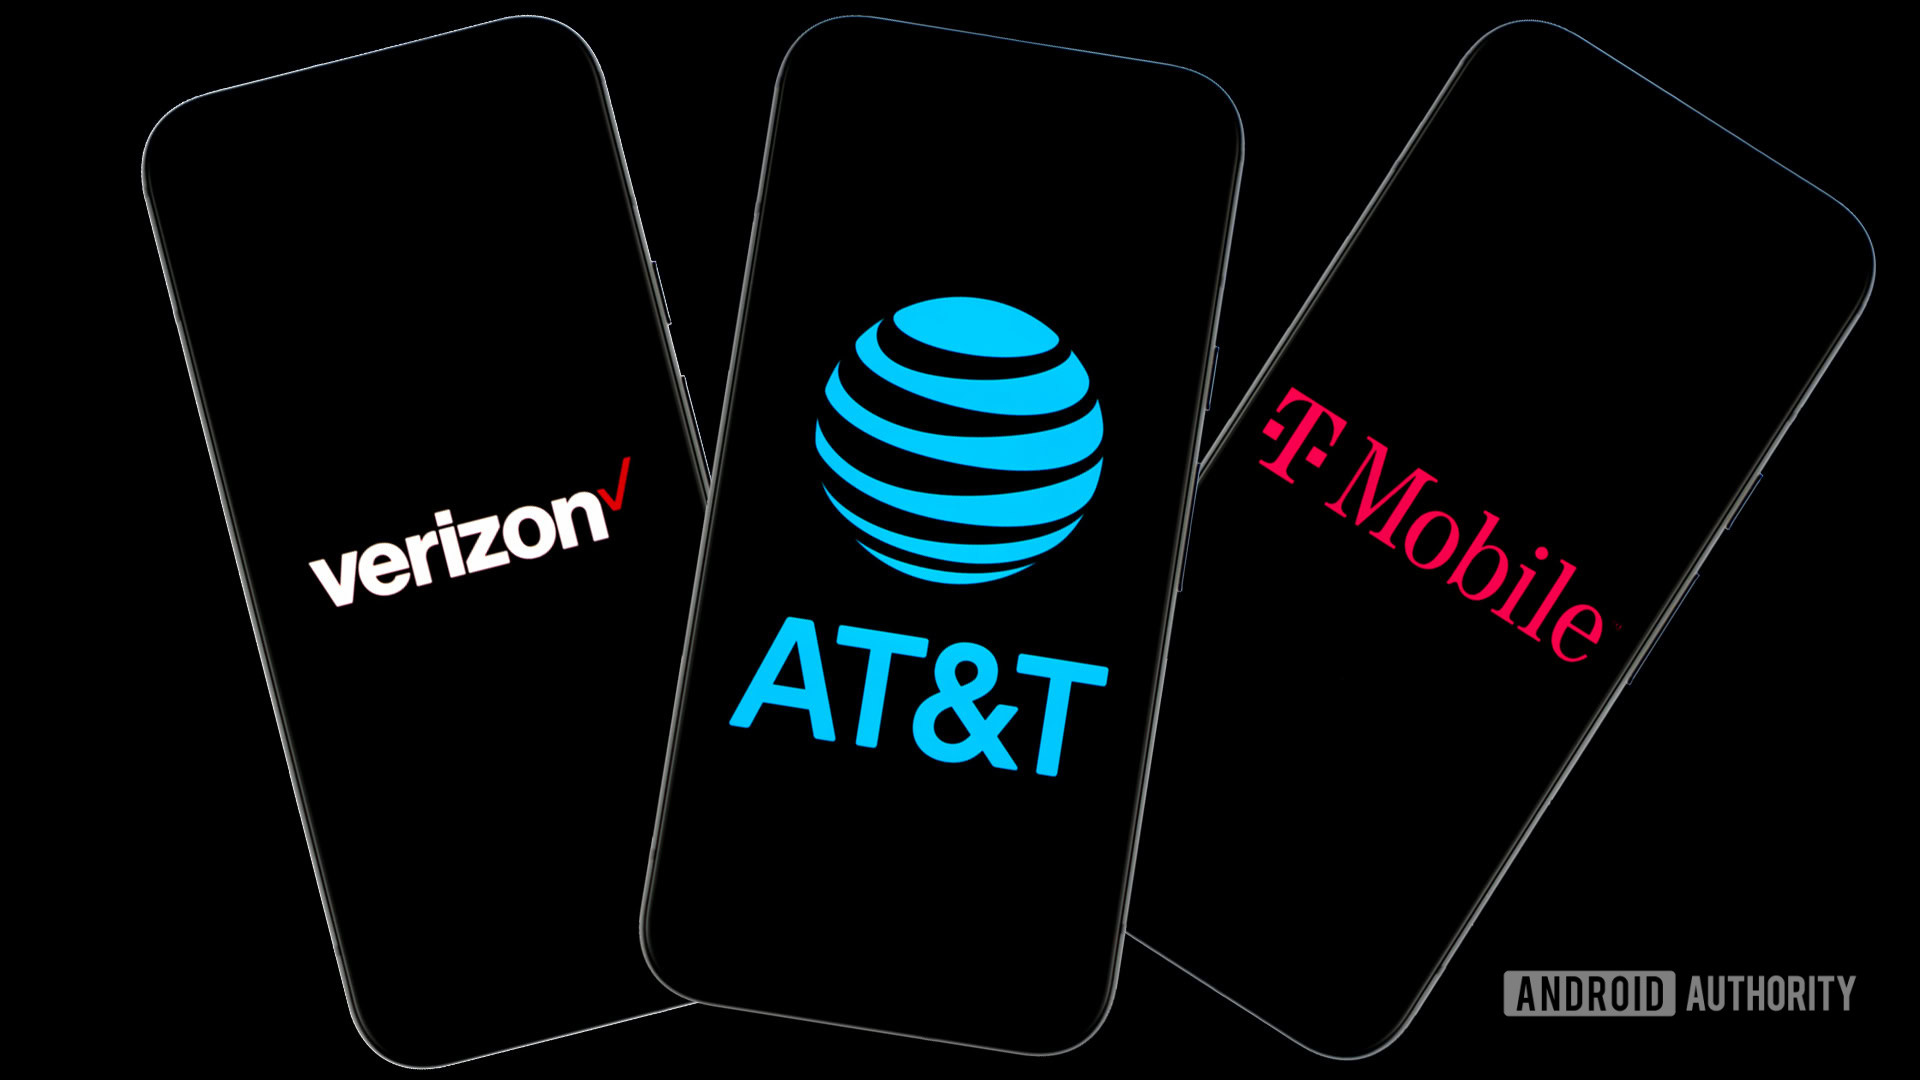 Stock photo of major US carriers Verizon Wireless, AT&T, and T Mobile (8)